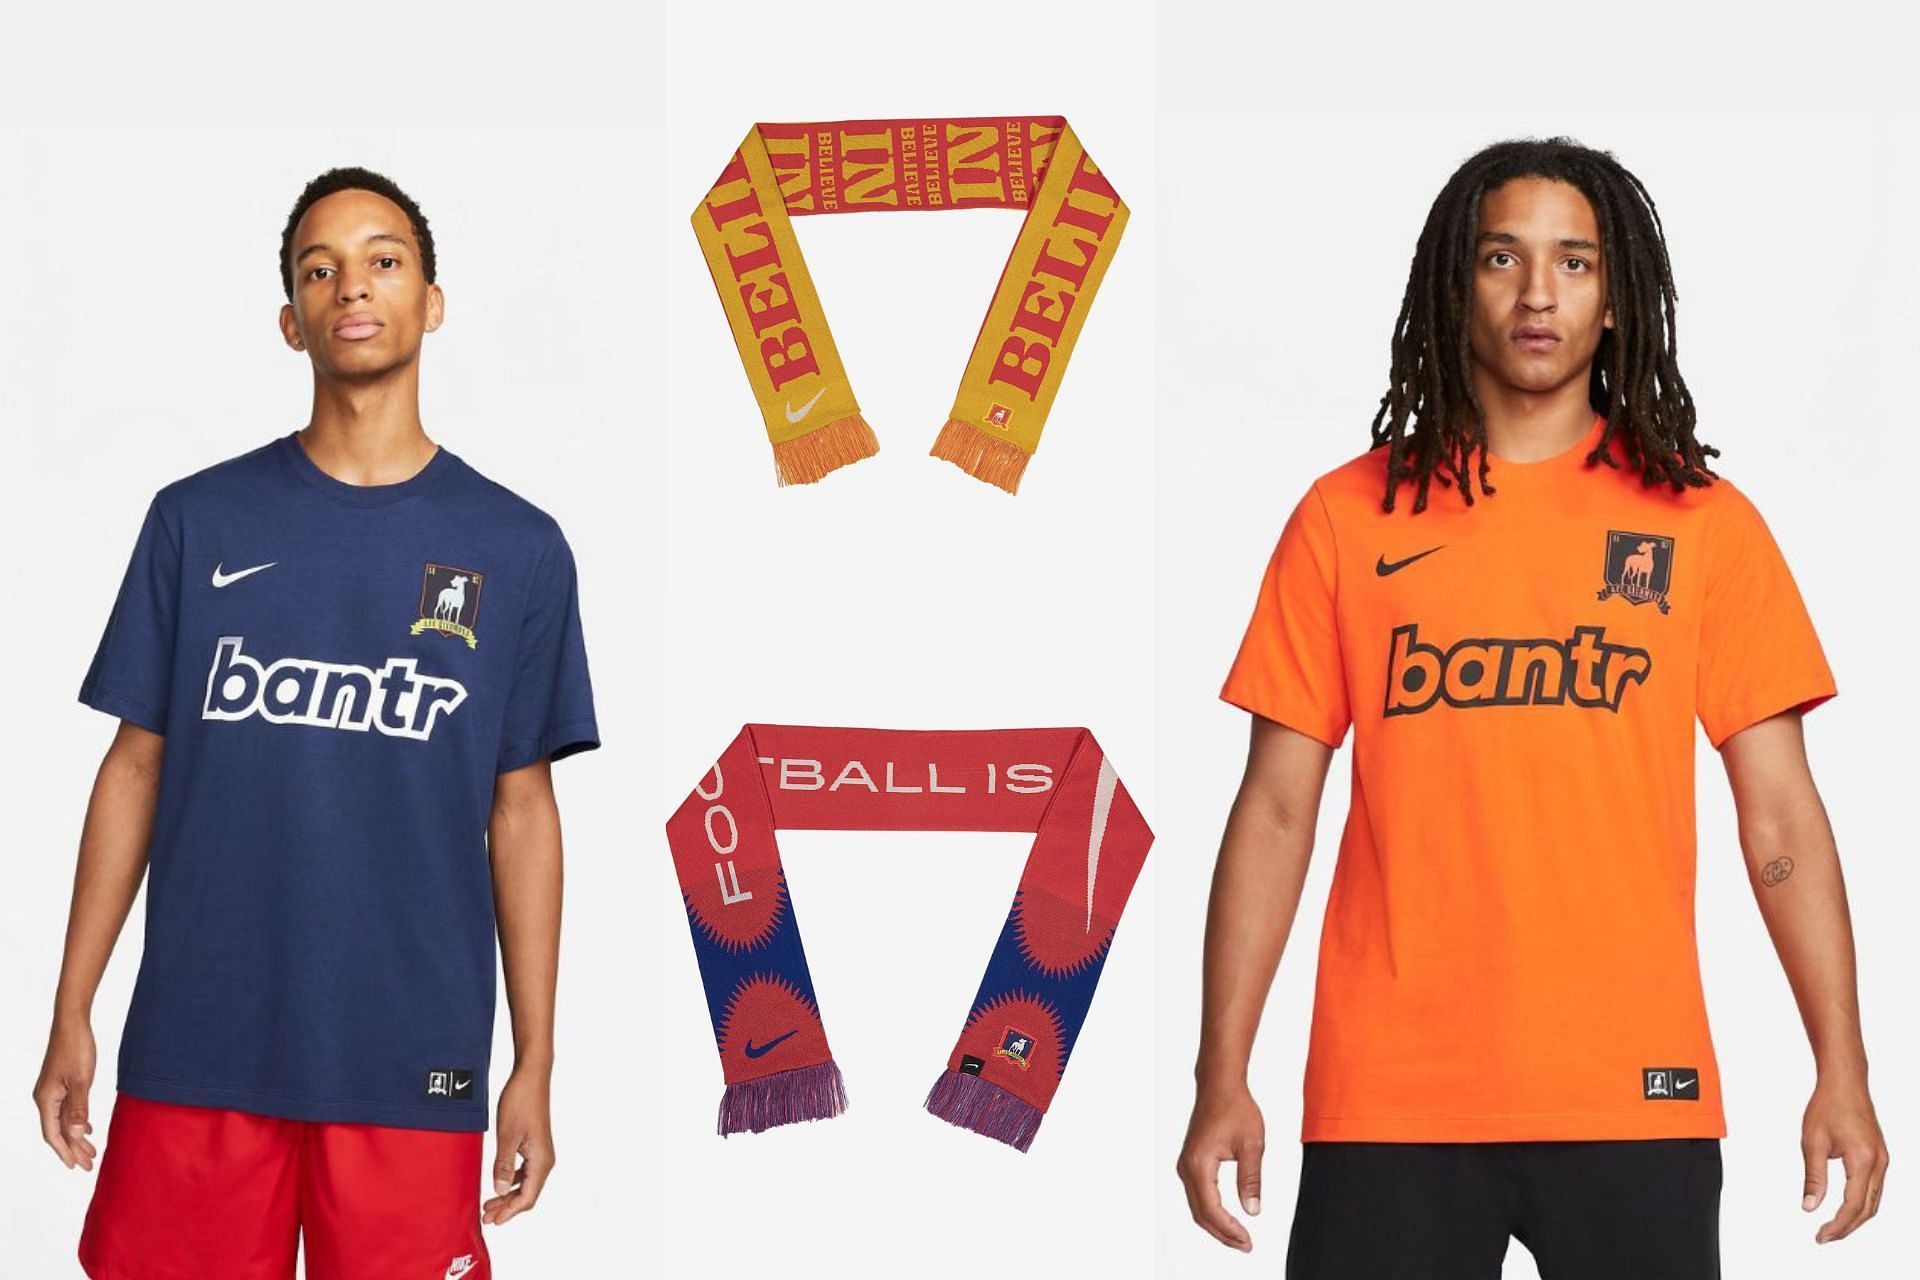 Take a look at the Bantr and Scarves tees (Image via Nike)